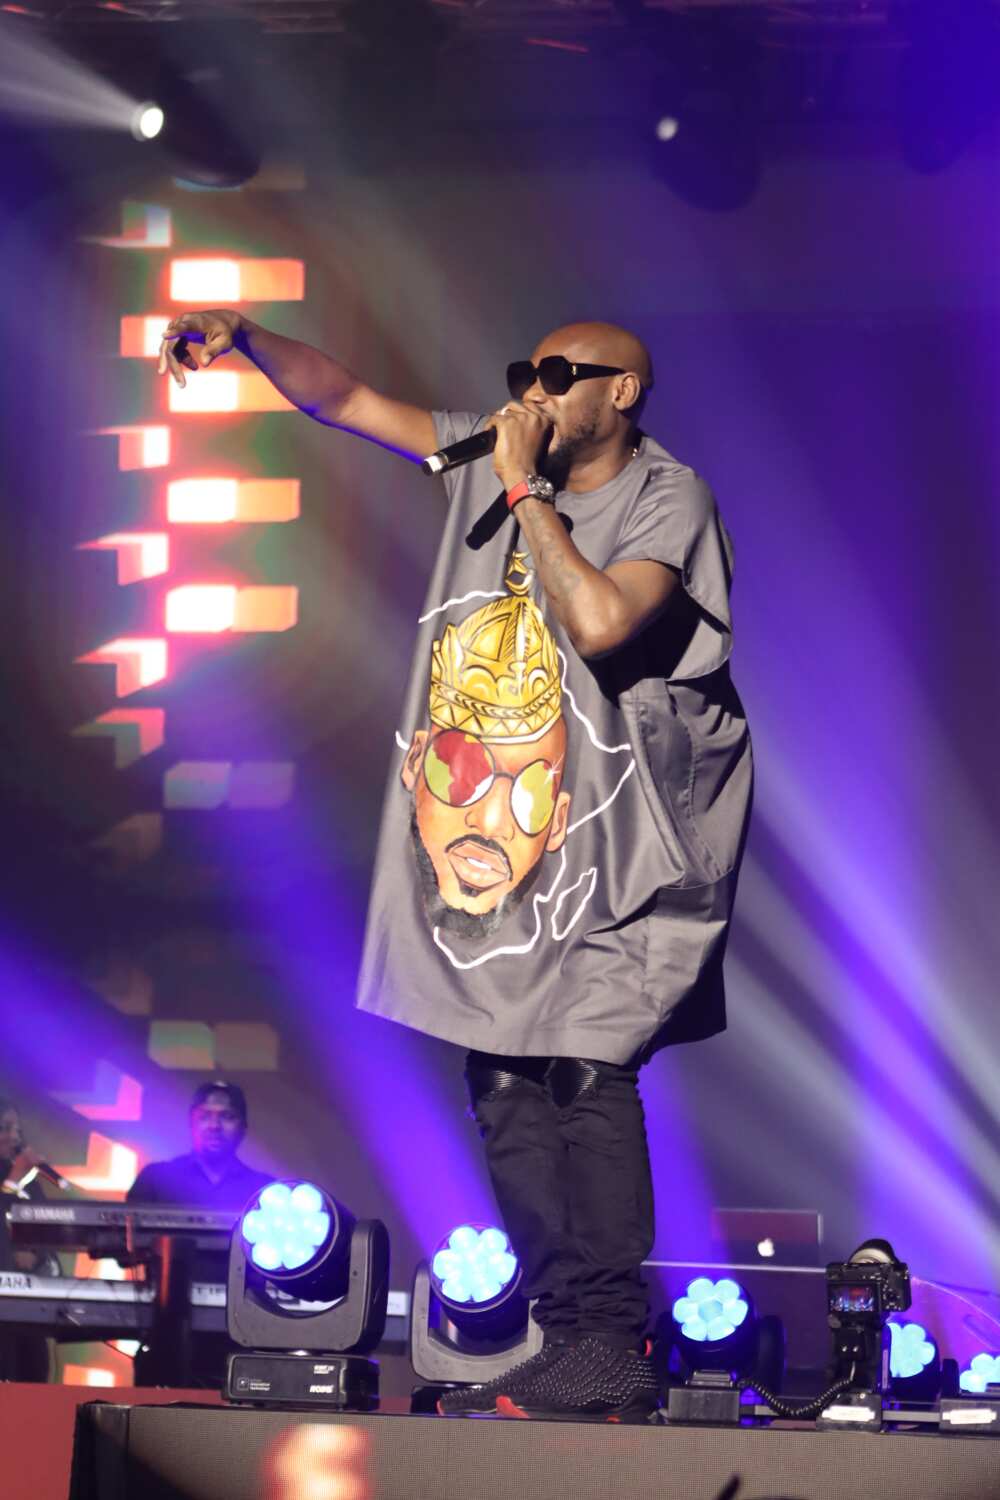 2baba is King! Singer claims throne at #20YearsAKing concert